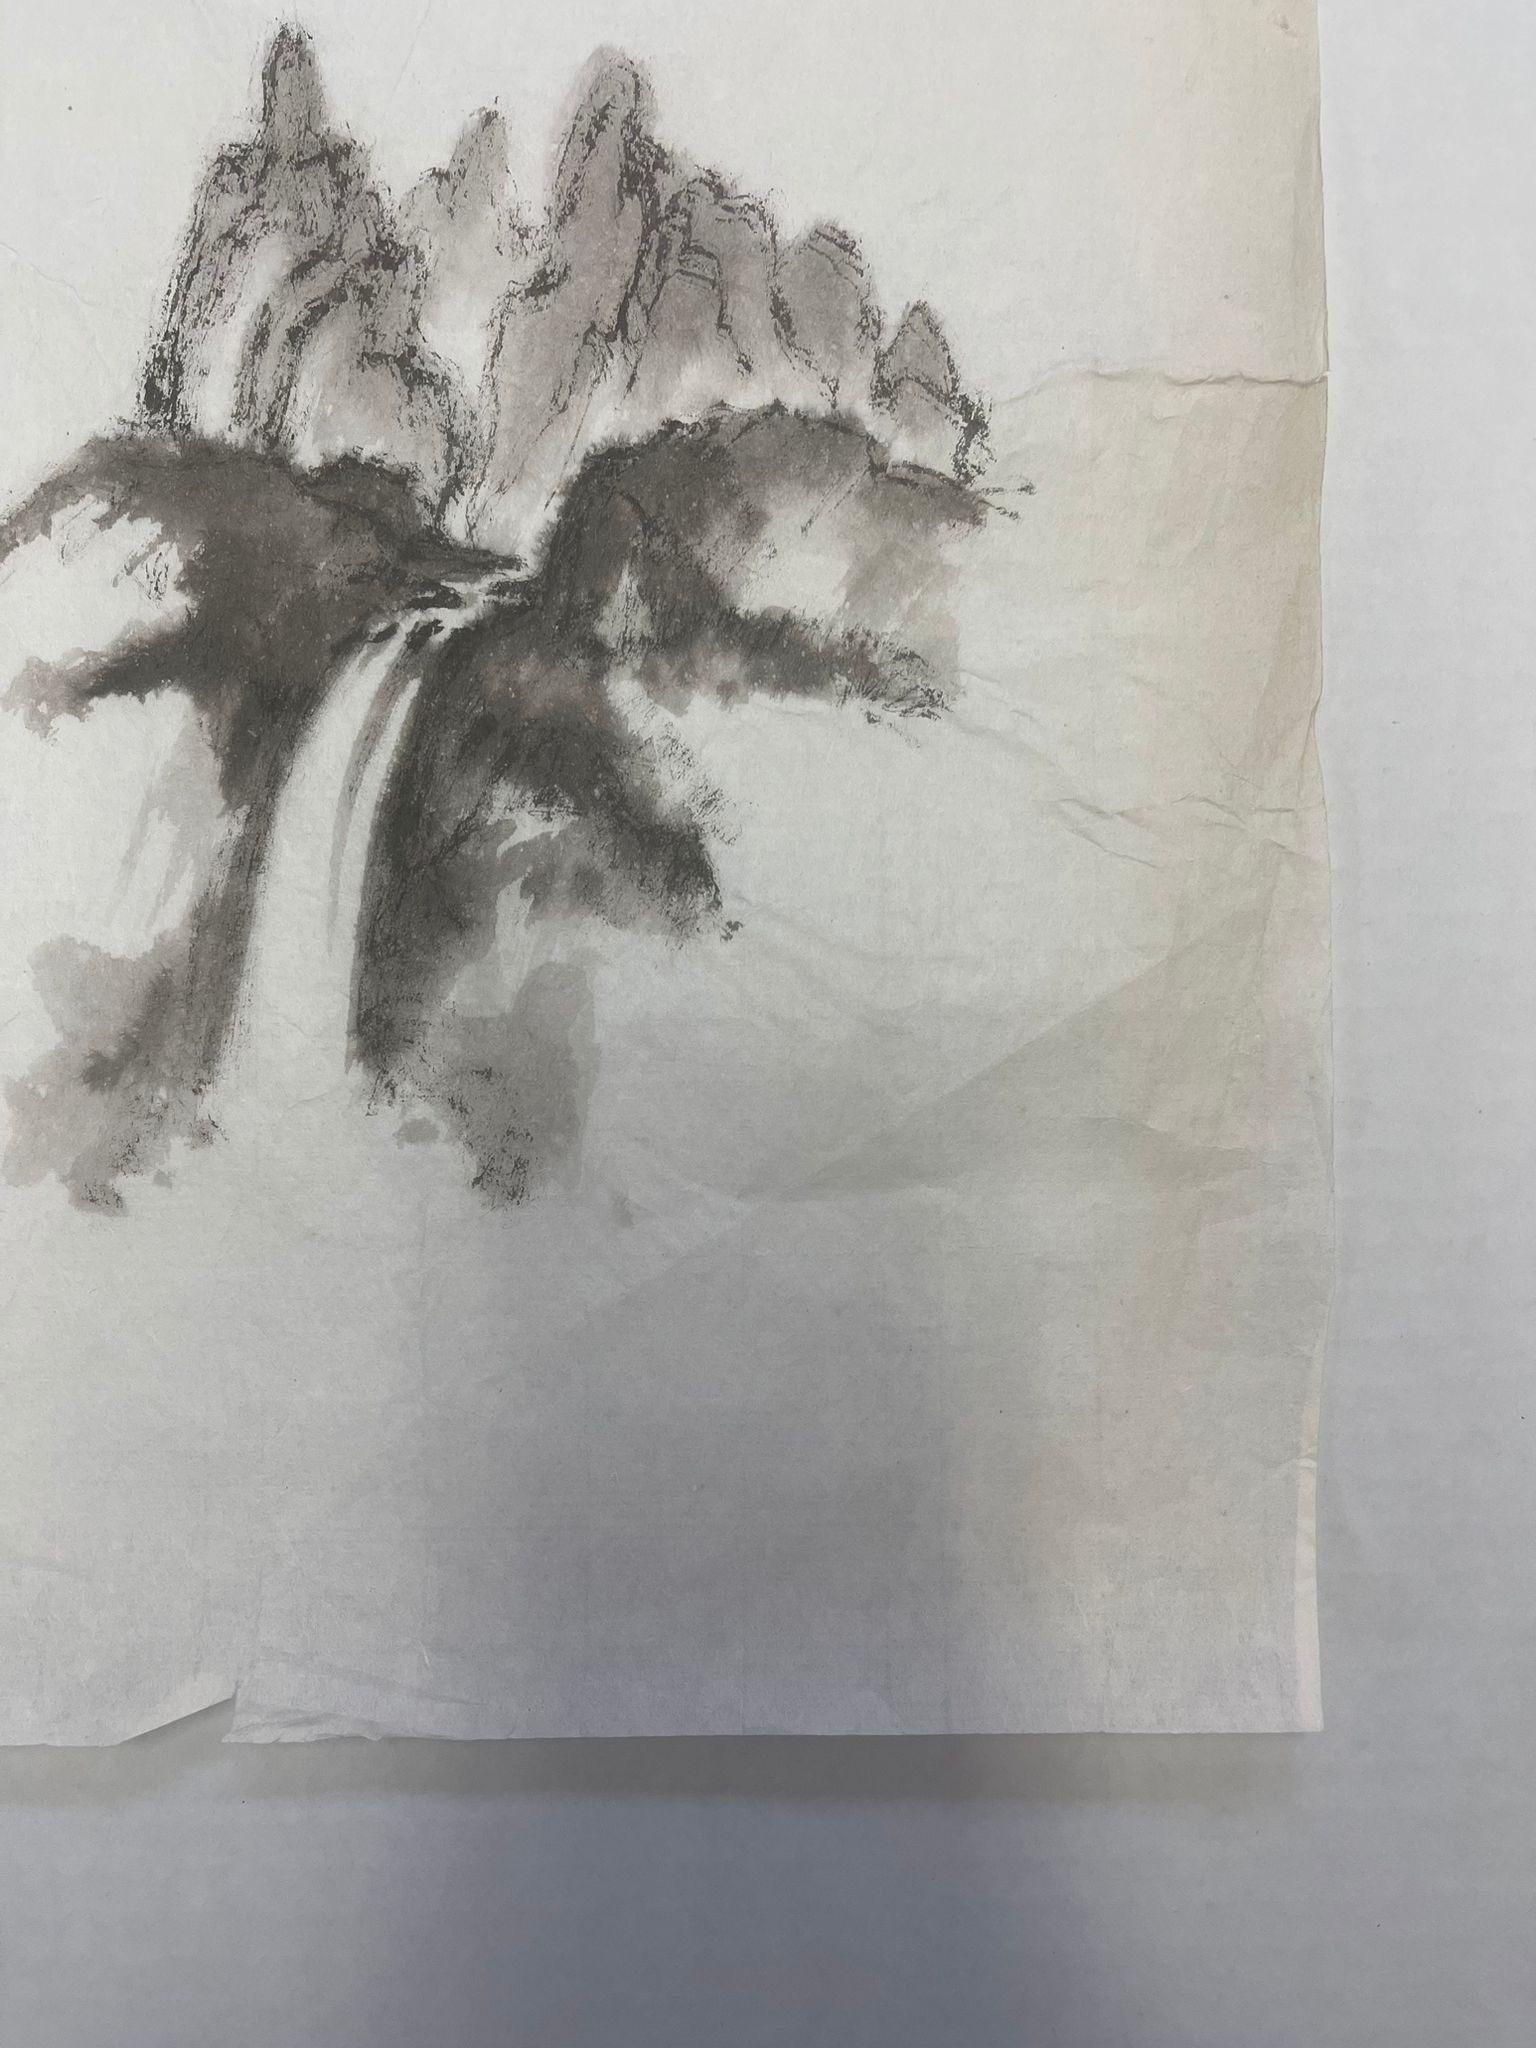 Possibly Watercolor or Pen on Paper. Unsigned Landscape Art of Mountains and waterfall. Vintage Condition Consistent with Age as Pictured 

Dimensions. 16 W ; 24 H